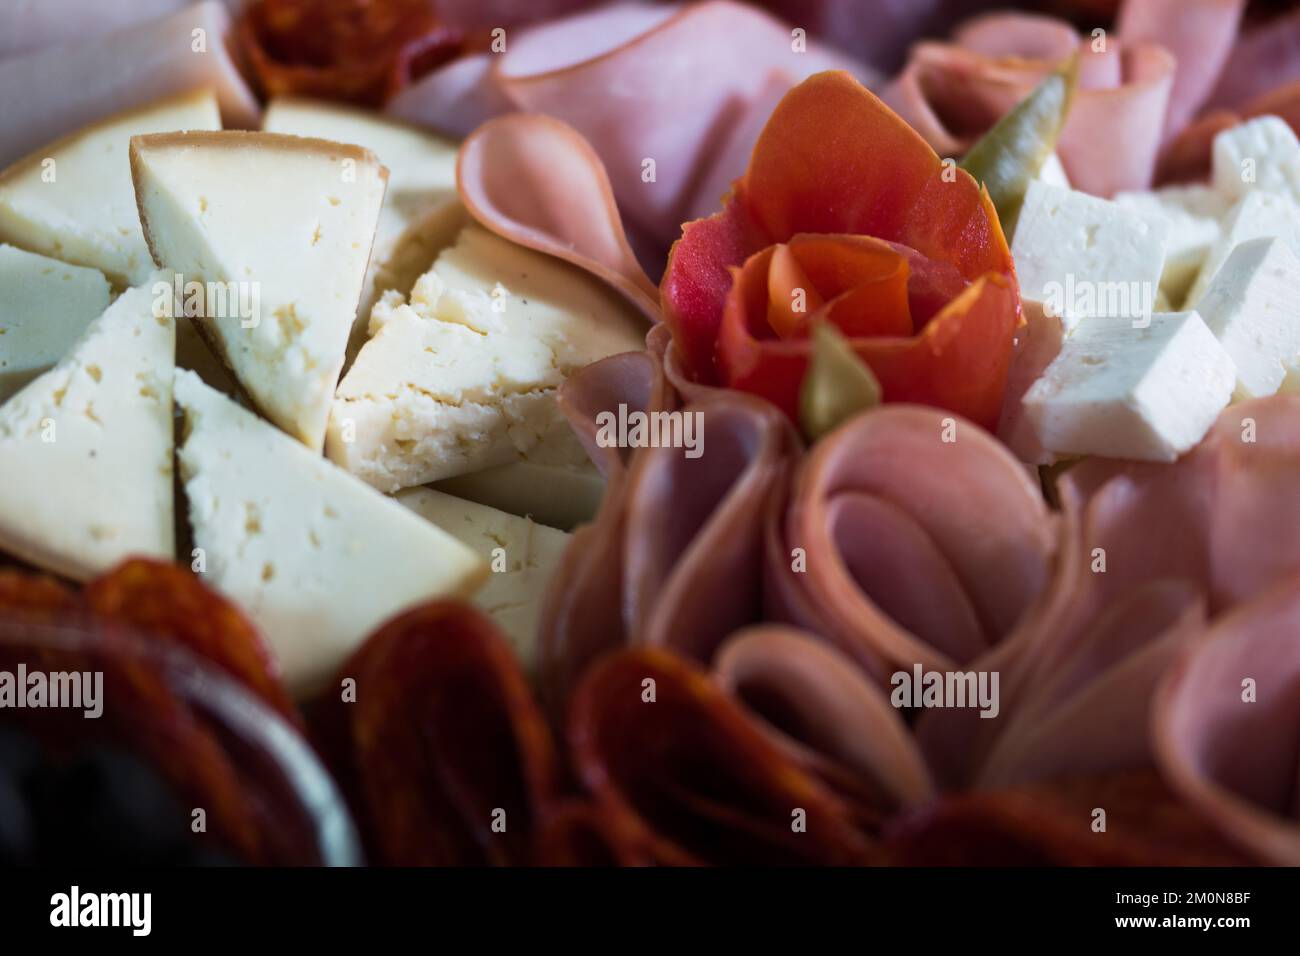 A closeup shot of a table with mix of meats and cheese Stock Photo